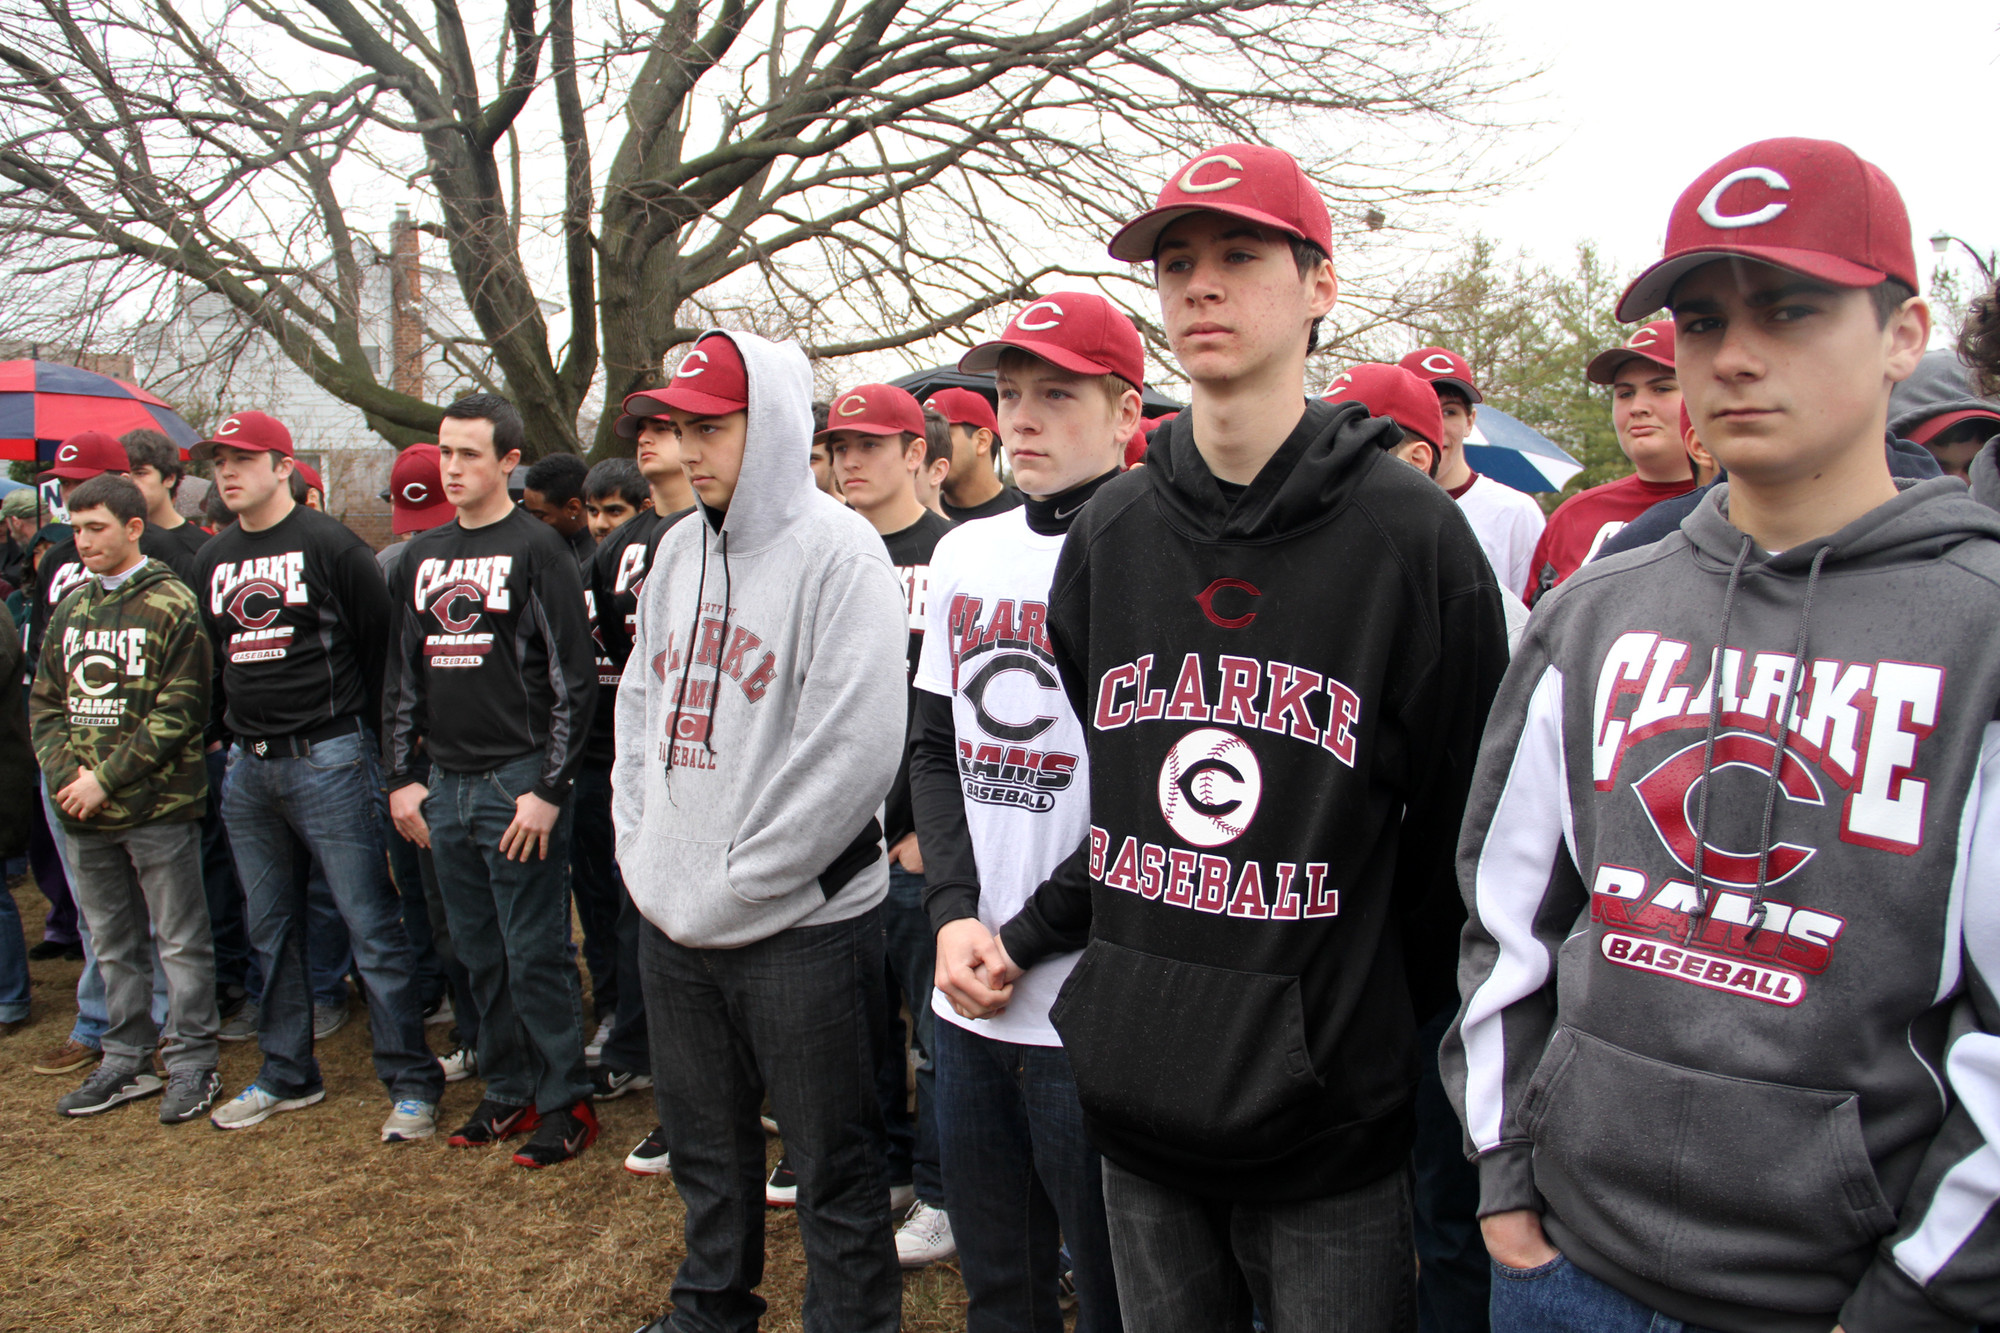 Clarke’s varsity and junior varsity baseball teams attended the ceremony to show their support. Pitone’s youngest son, Kyle, is a JV player.